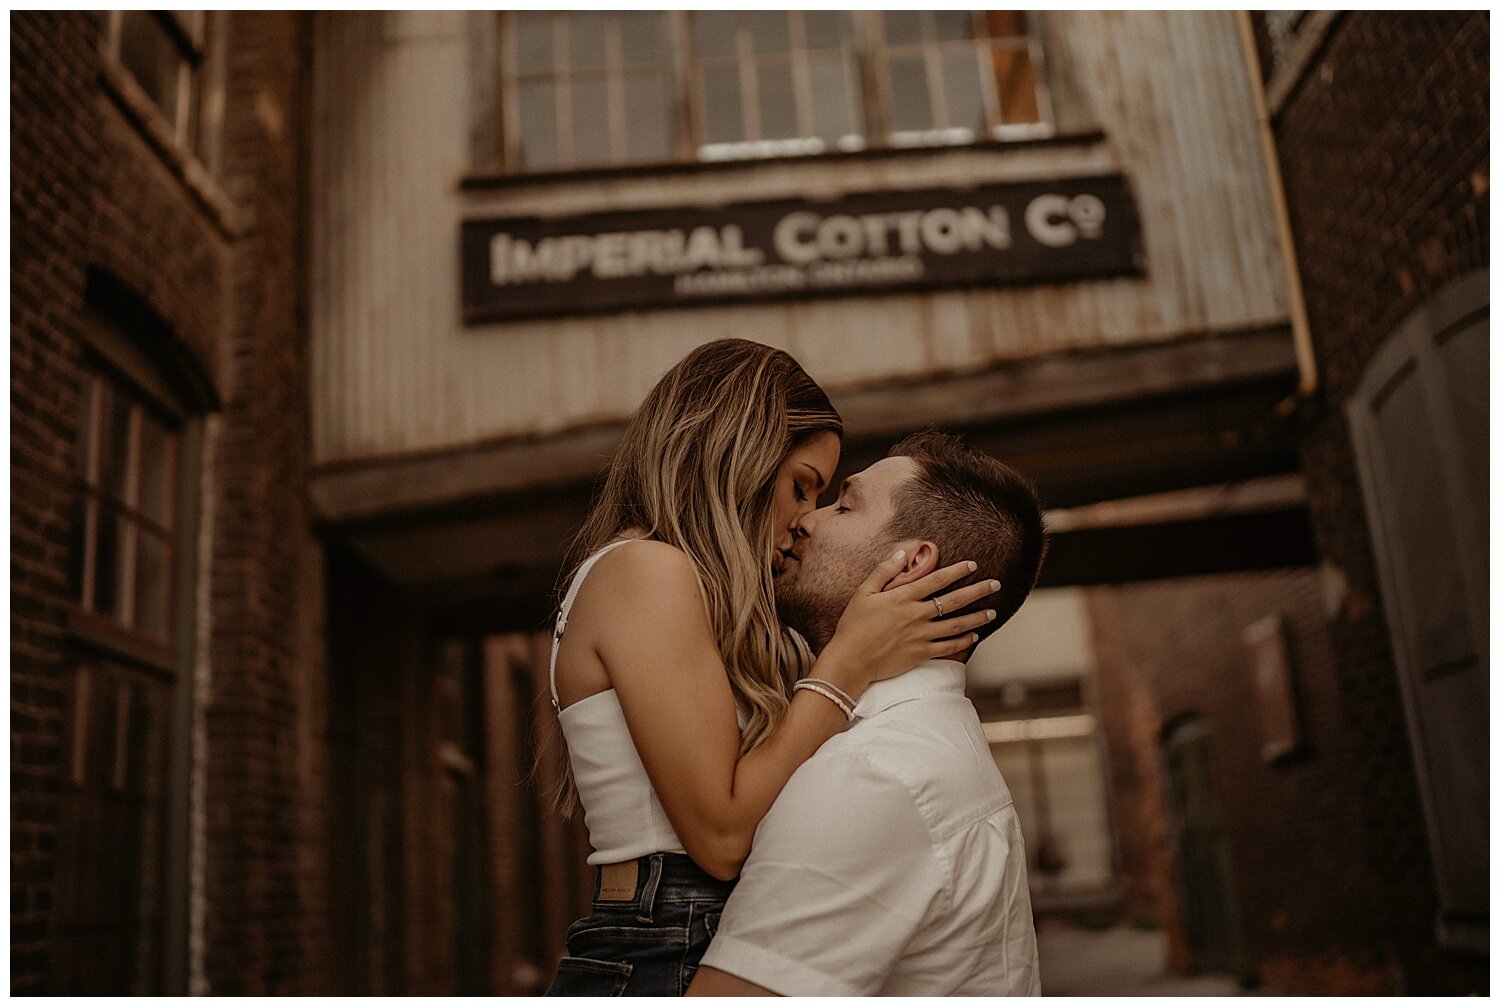 Cotton_Factory_And_Waterfall_Engagement_Session_Hamilton_Ontario_Wedding_Photographer_0035.jpg